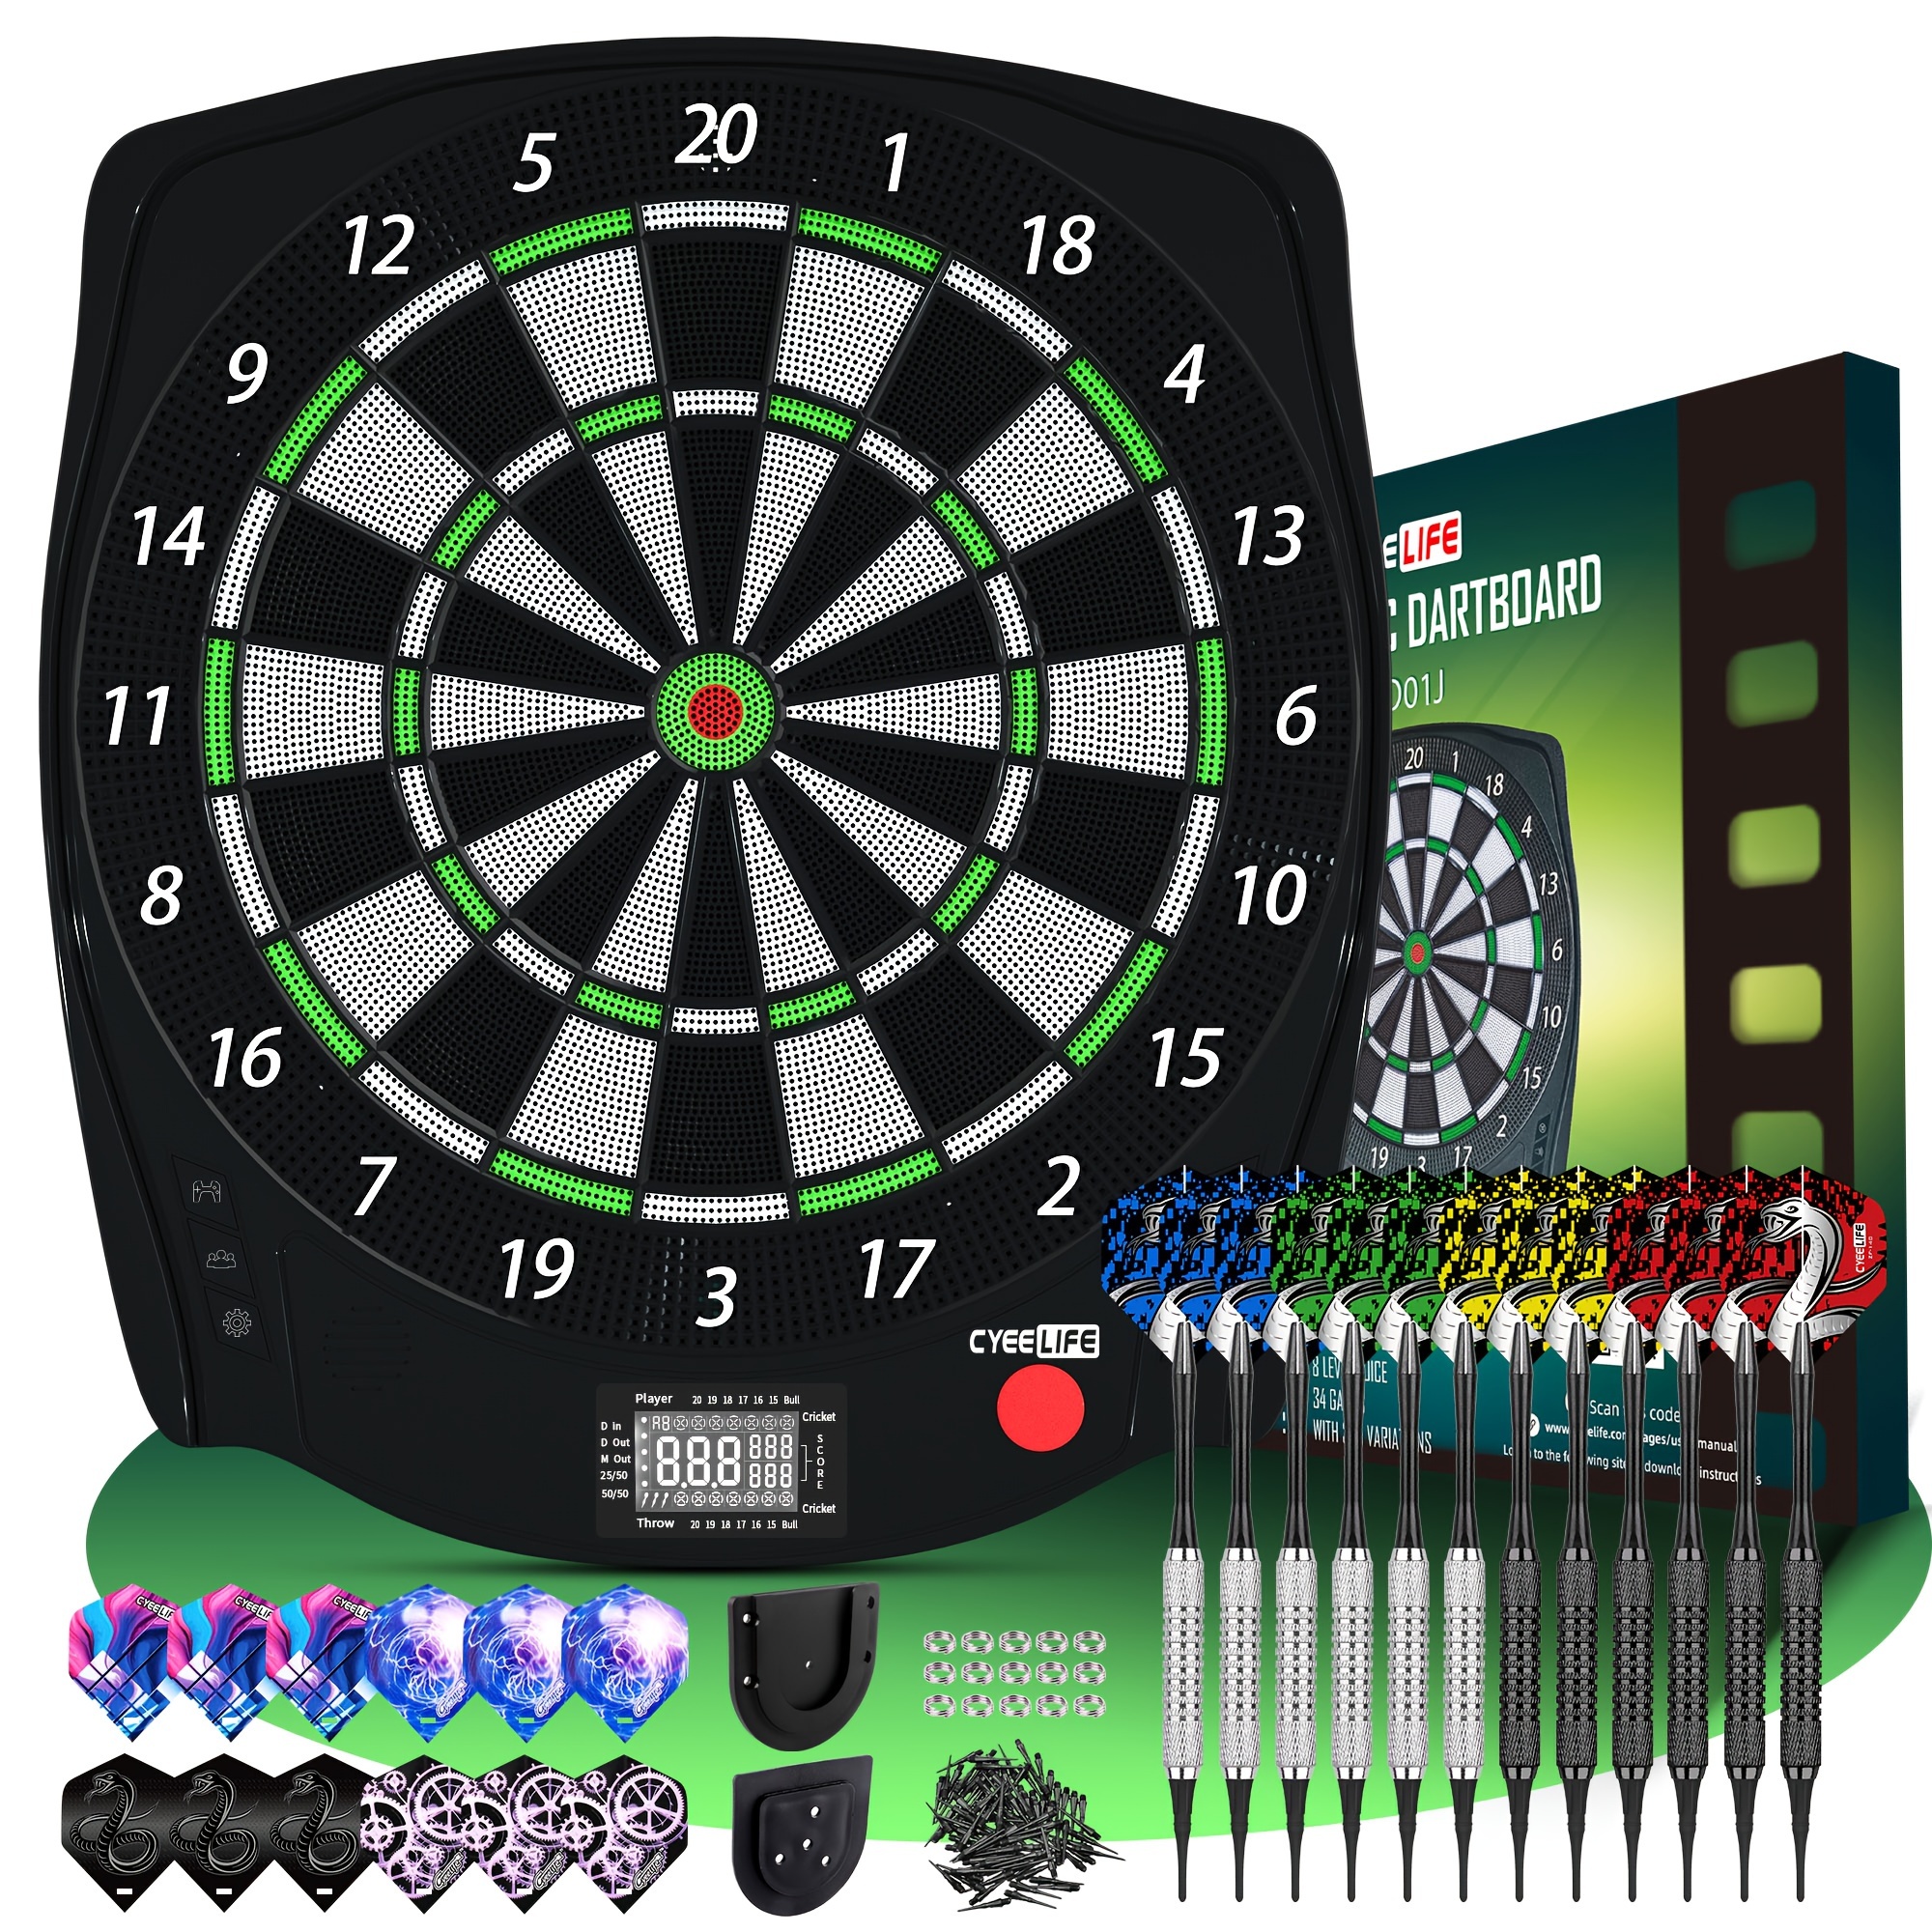 

Cyeelife Electronic Soft Dart Target With 12 Soft Pointed Darts, Switching Between 3 Languages, And Multiple Game Modes